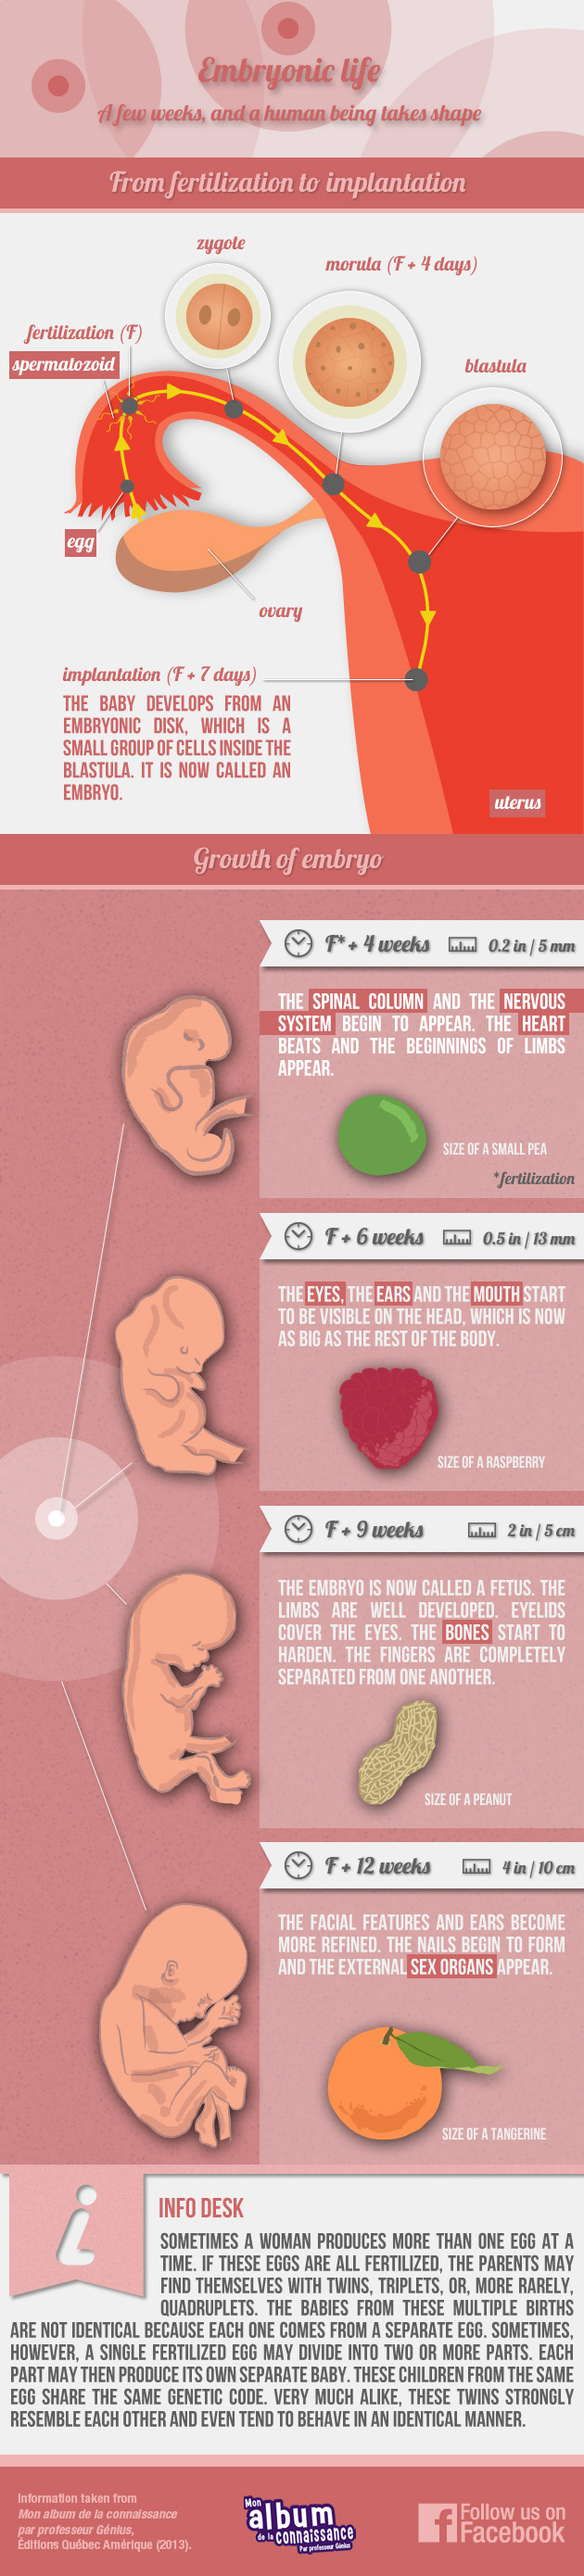 Infographic: embryonic life